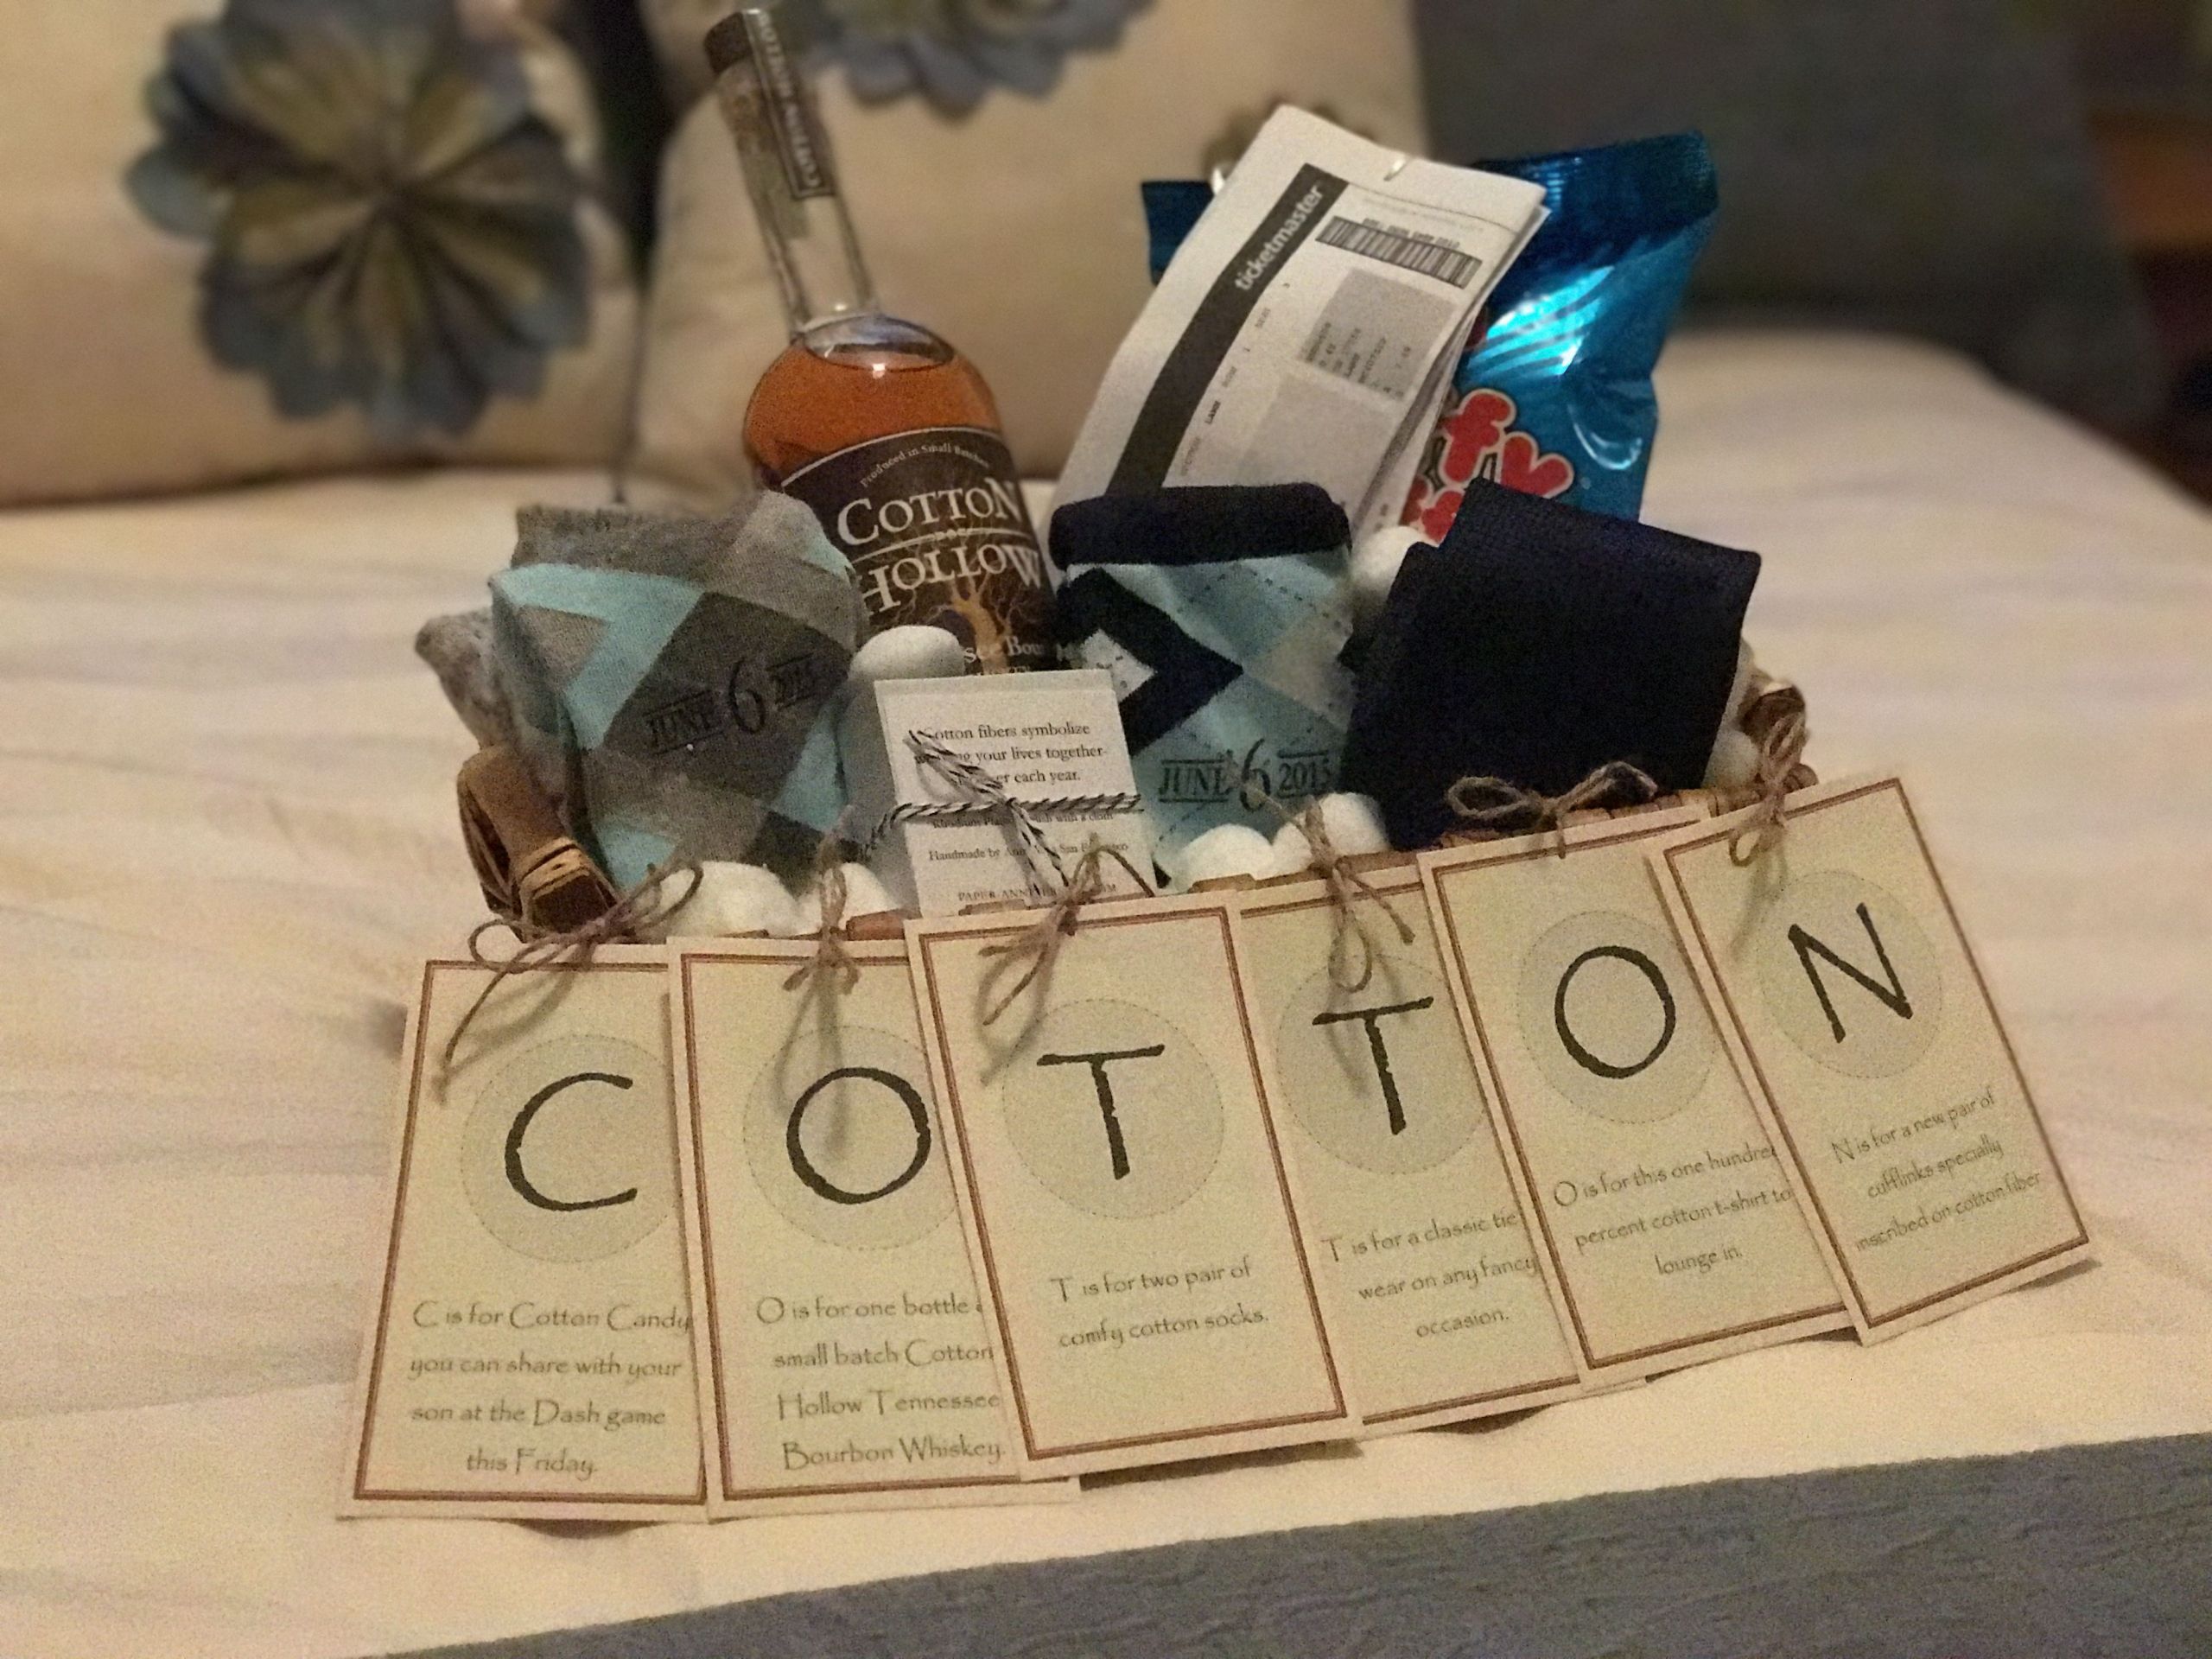 Second Anniversary Cotton Gift Ideas
 The "Cotton" Anniversary Gift for Him